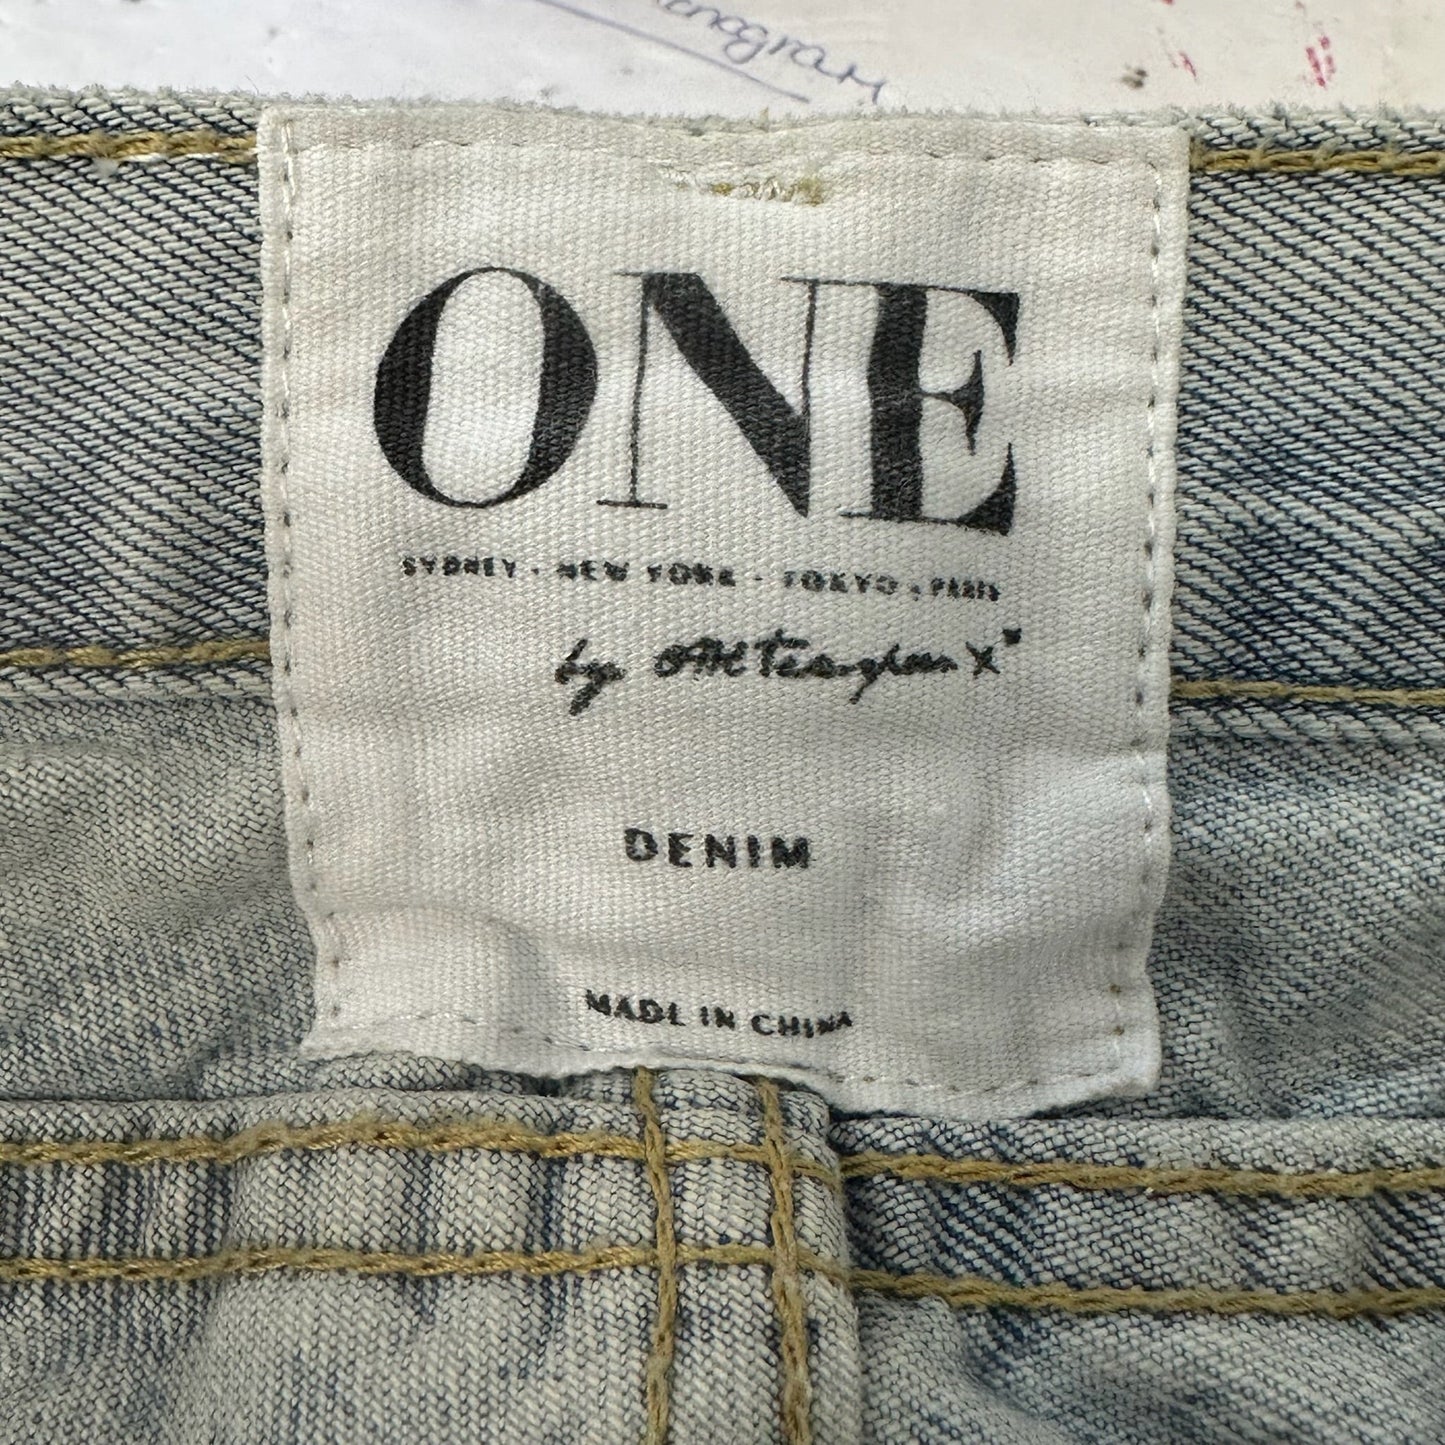 Denim Jeans Cropped Anthropologie, Size 4